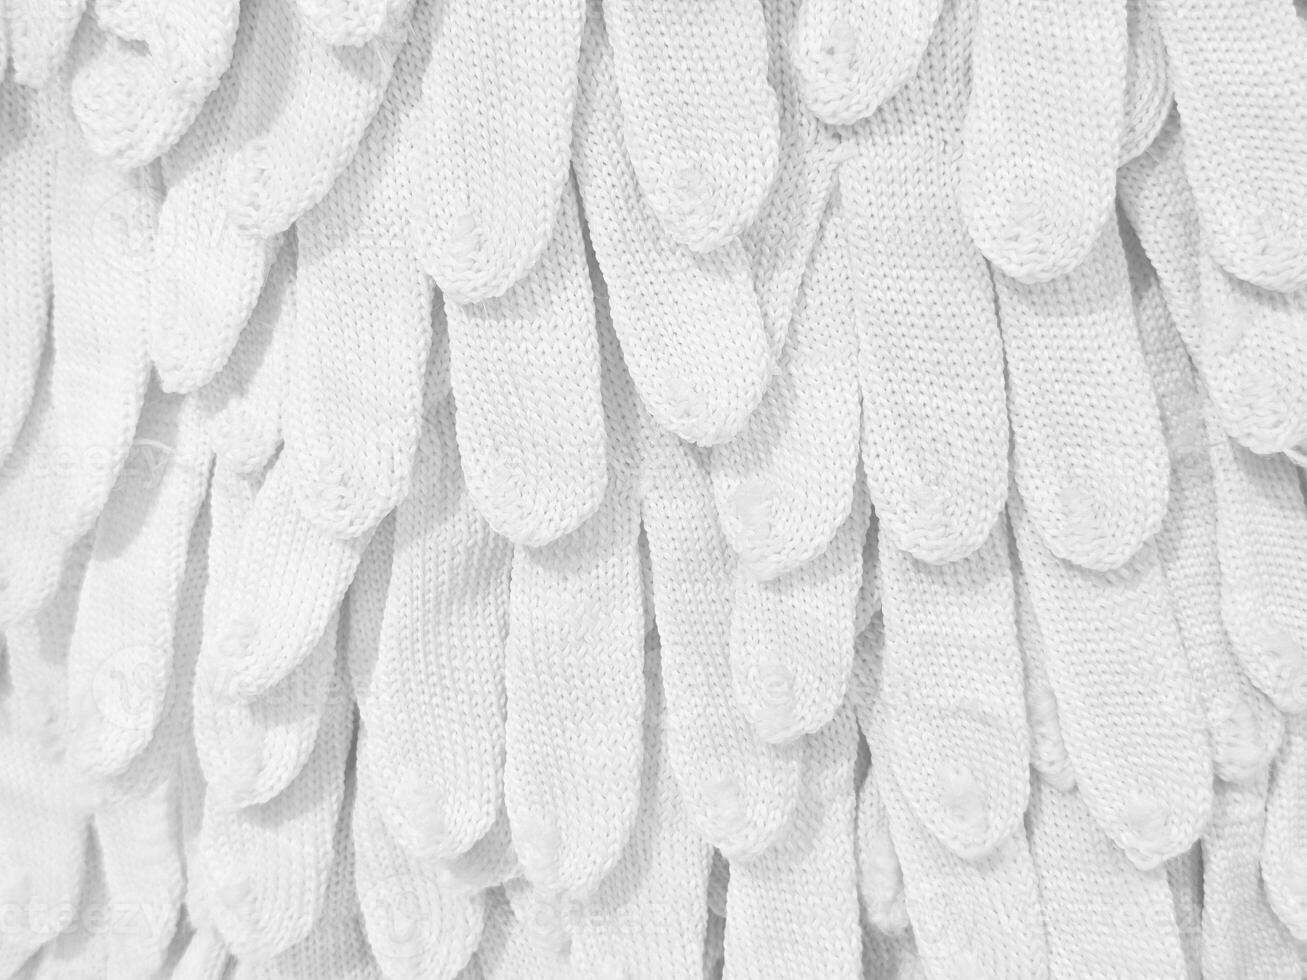 Cotton Knitted Gloves Wall Background. photo